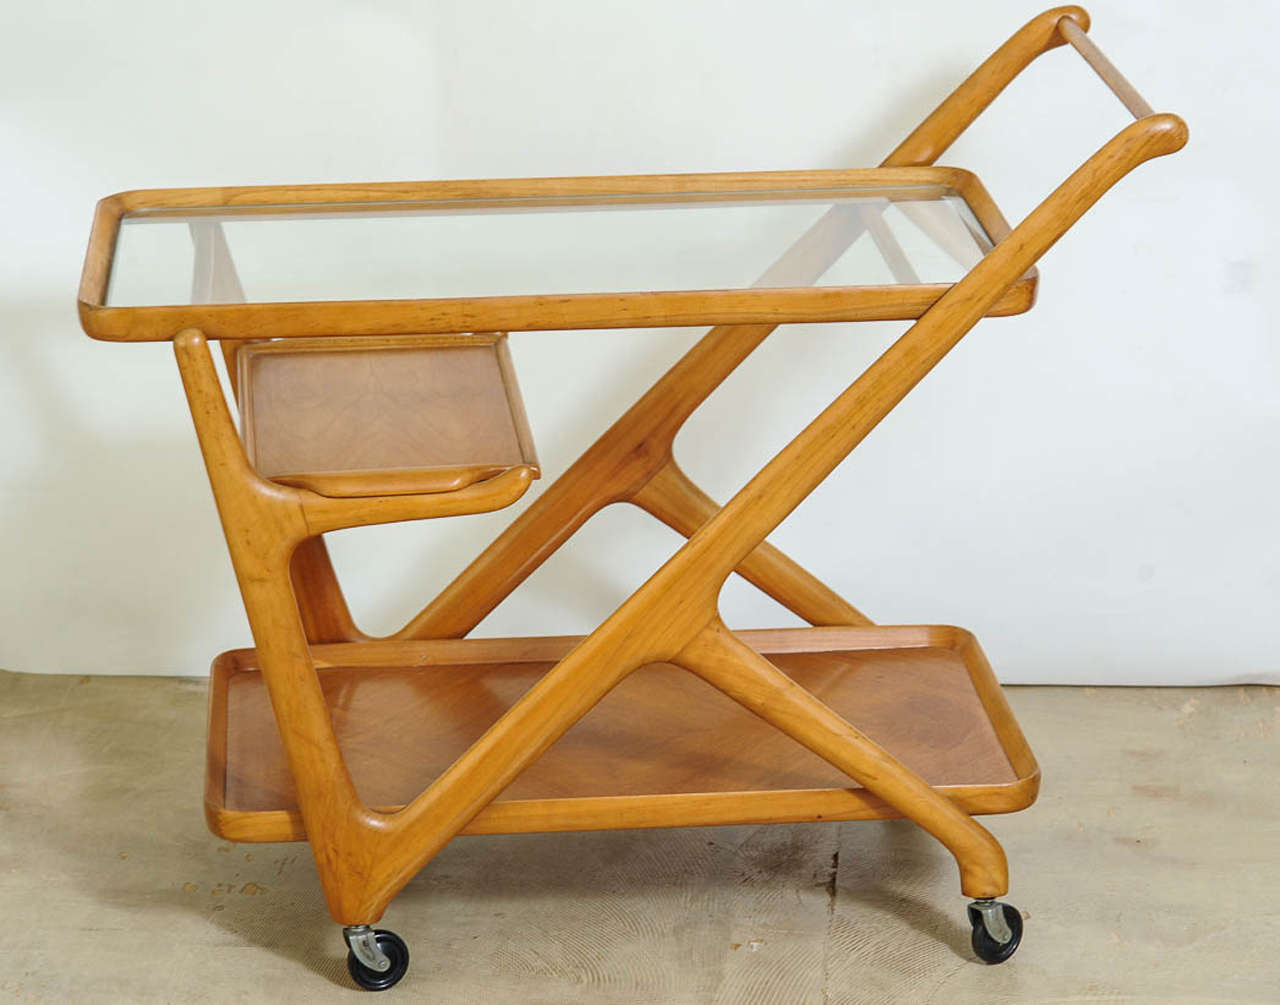 Very elegant Italian Tea Trolley from the 1950s.
This is the version in beech wood. 
Including the original removable serving tray.